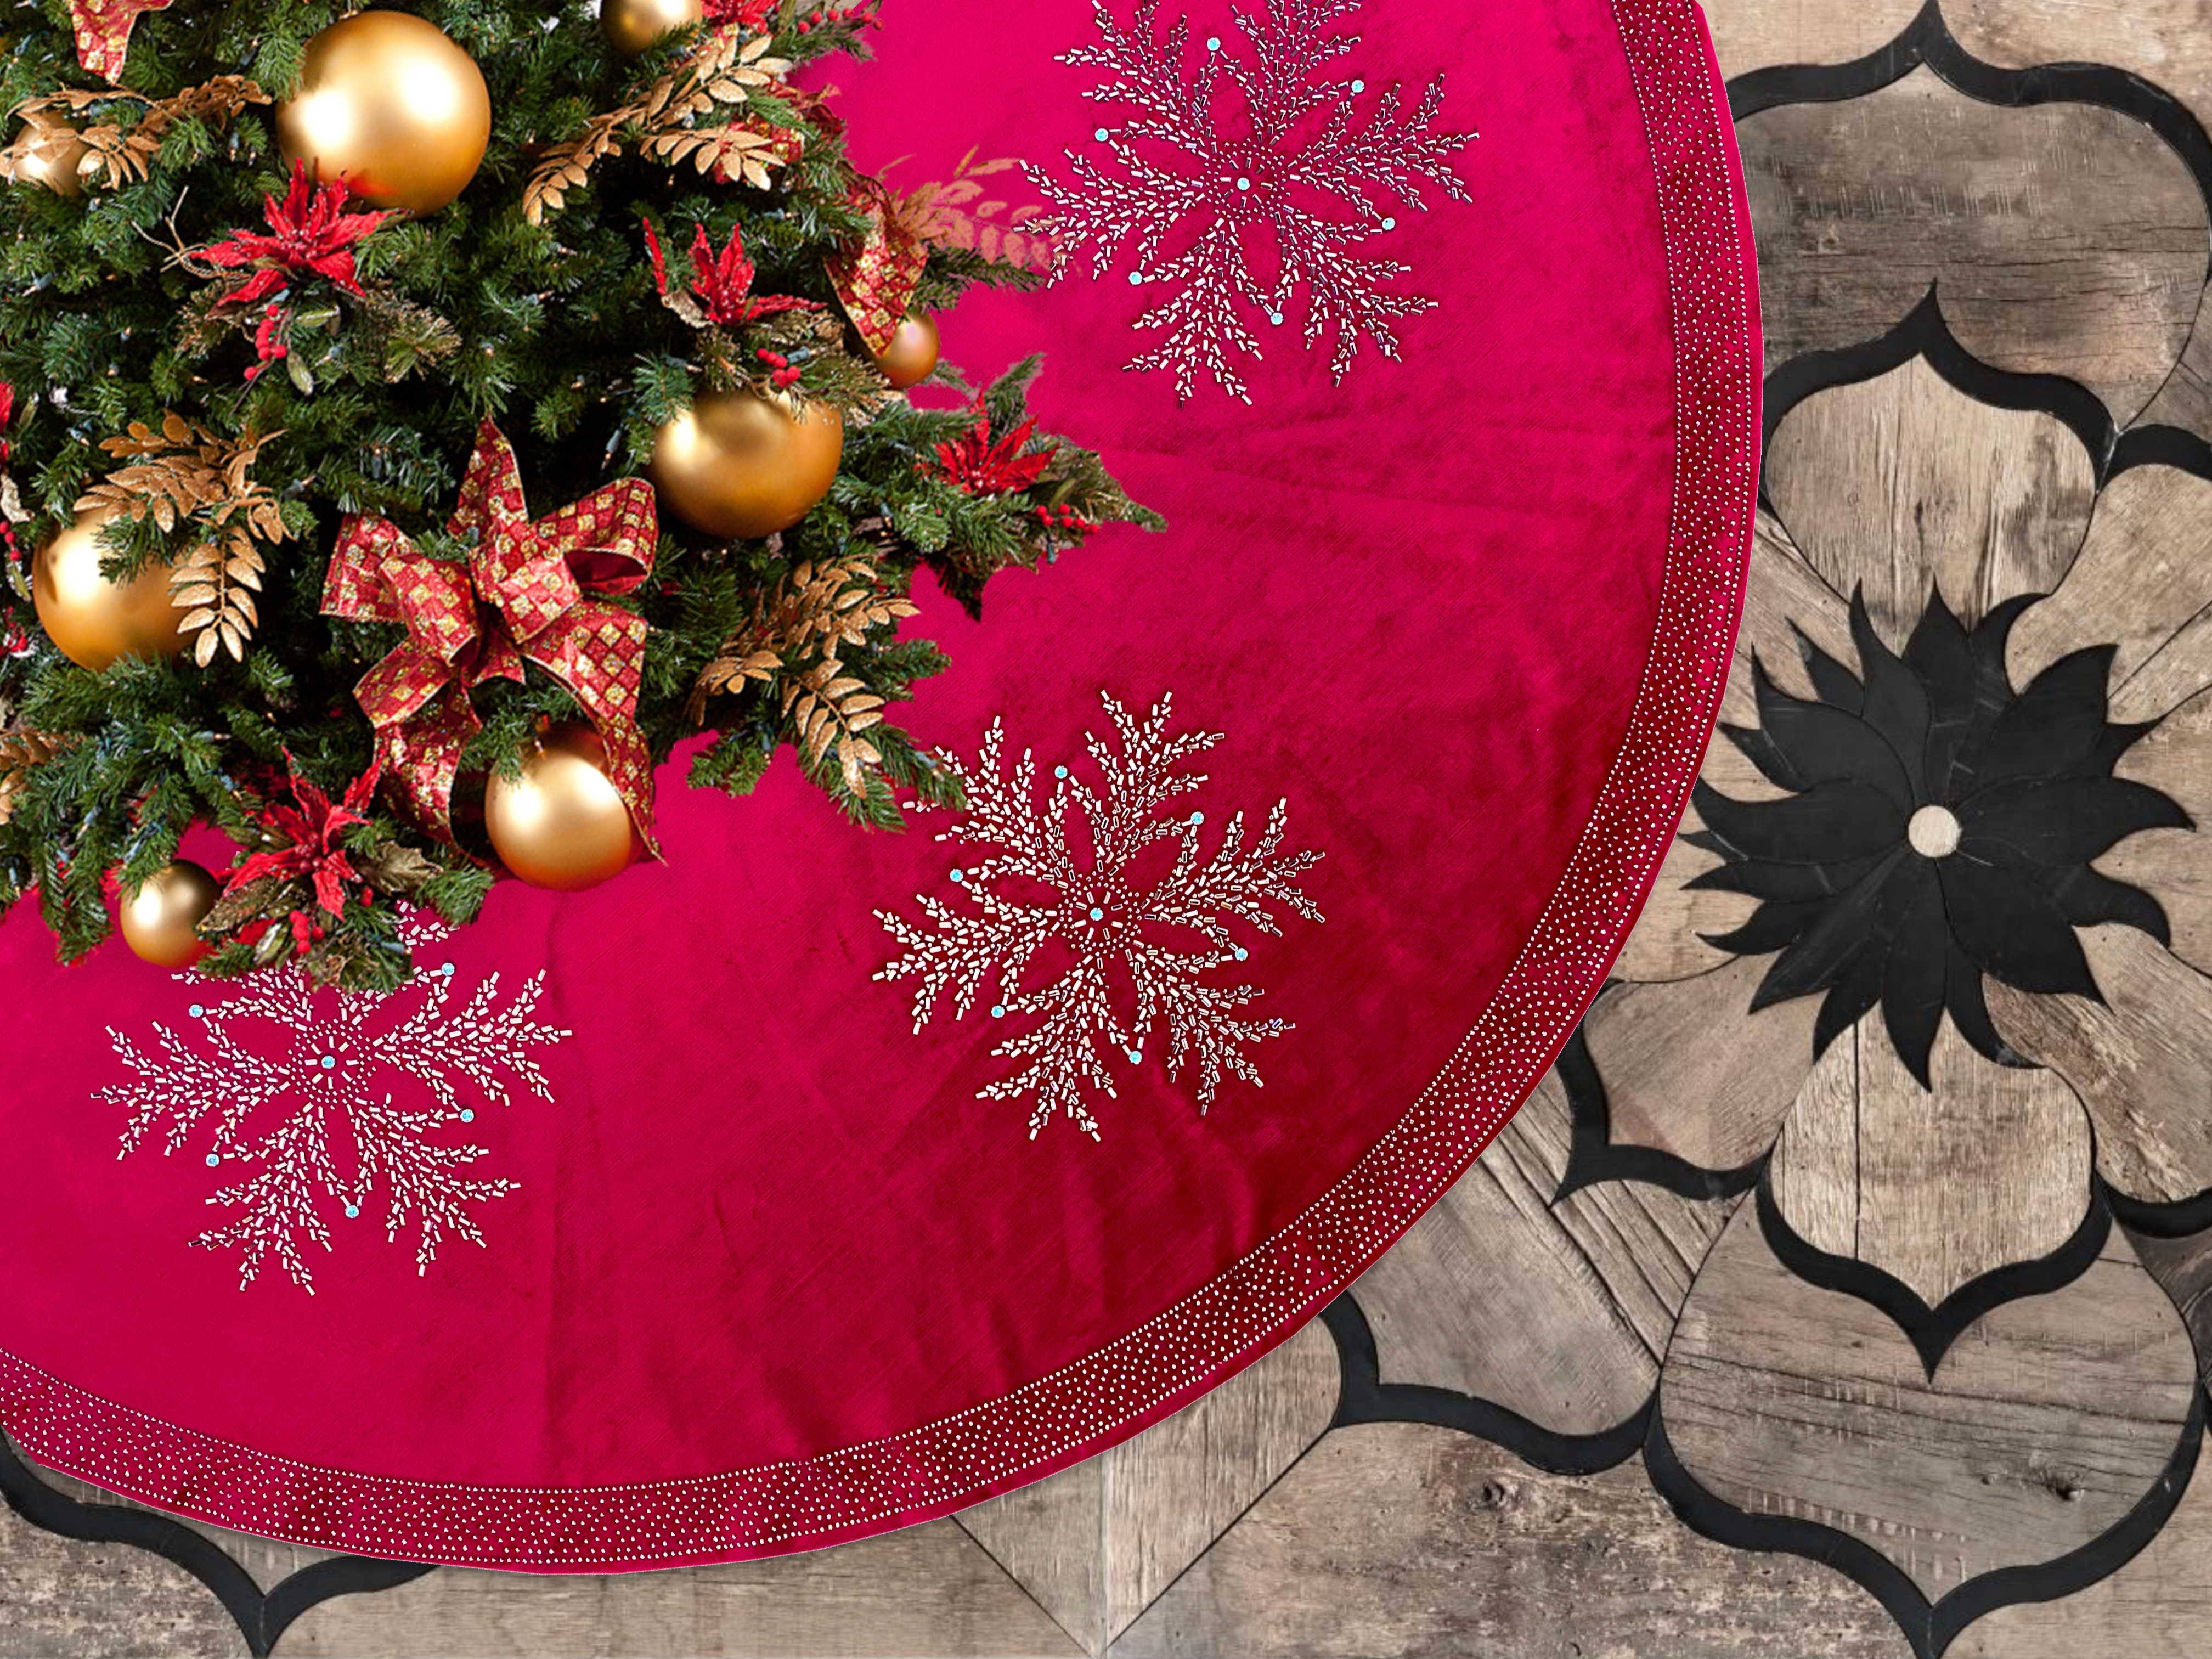 Crystal Personalized Christmas Tree Skirt Gift for Family.Rhinestones  Snowflake on Red Velvet, Luxury Home Decor by Sade